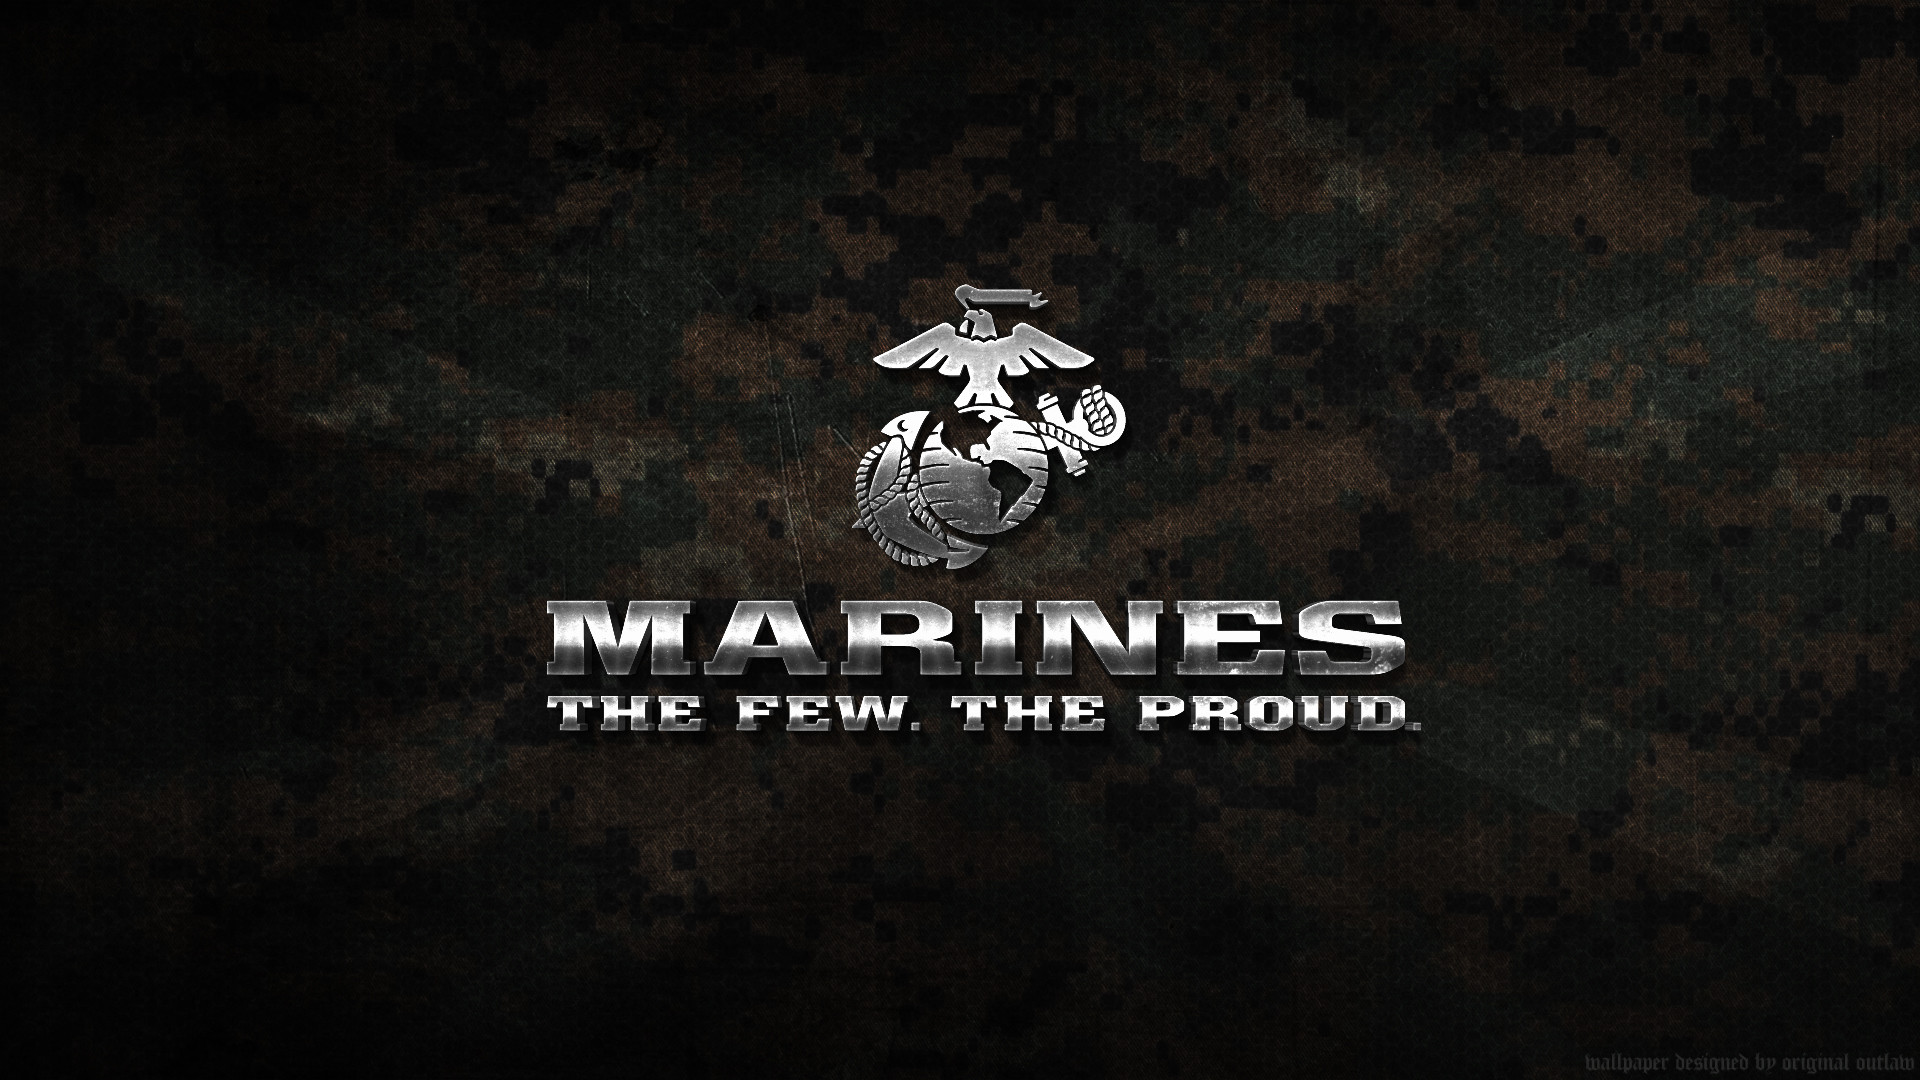 Marine Corps Wallpaper and Screensavers 53 images